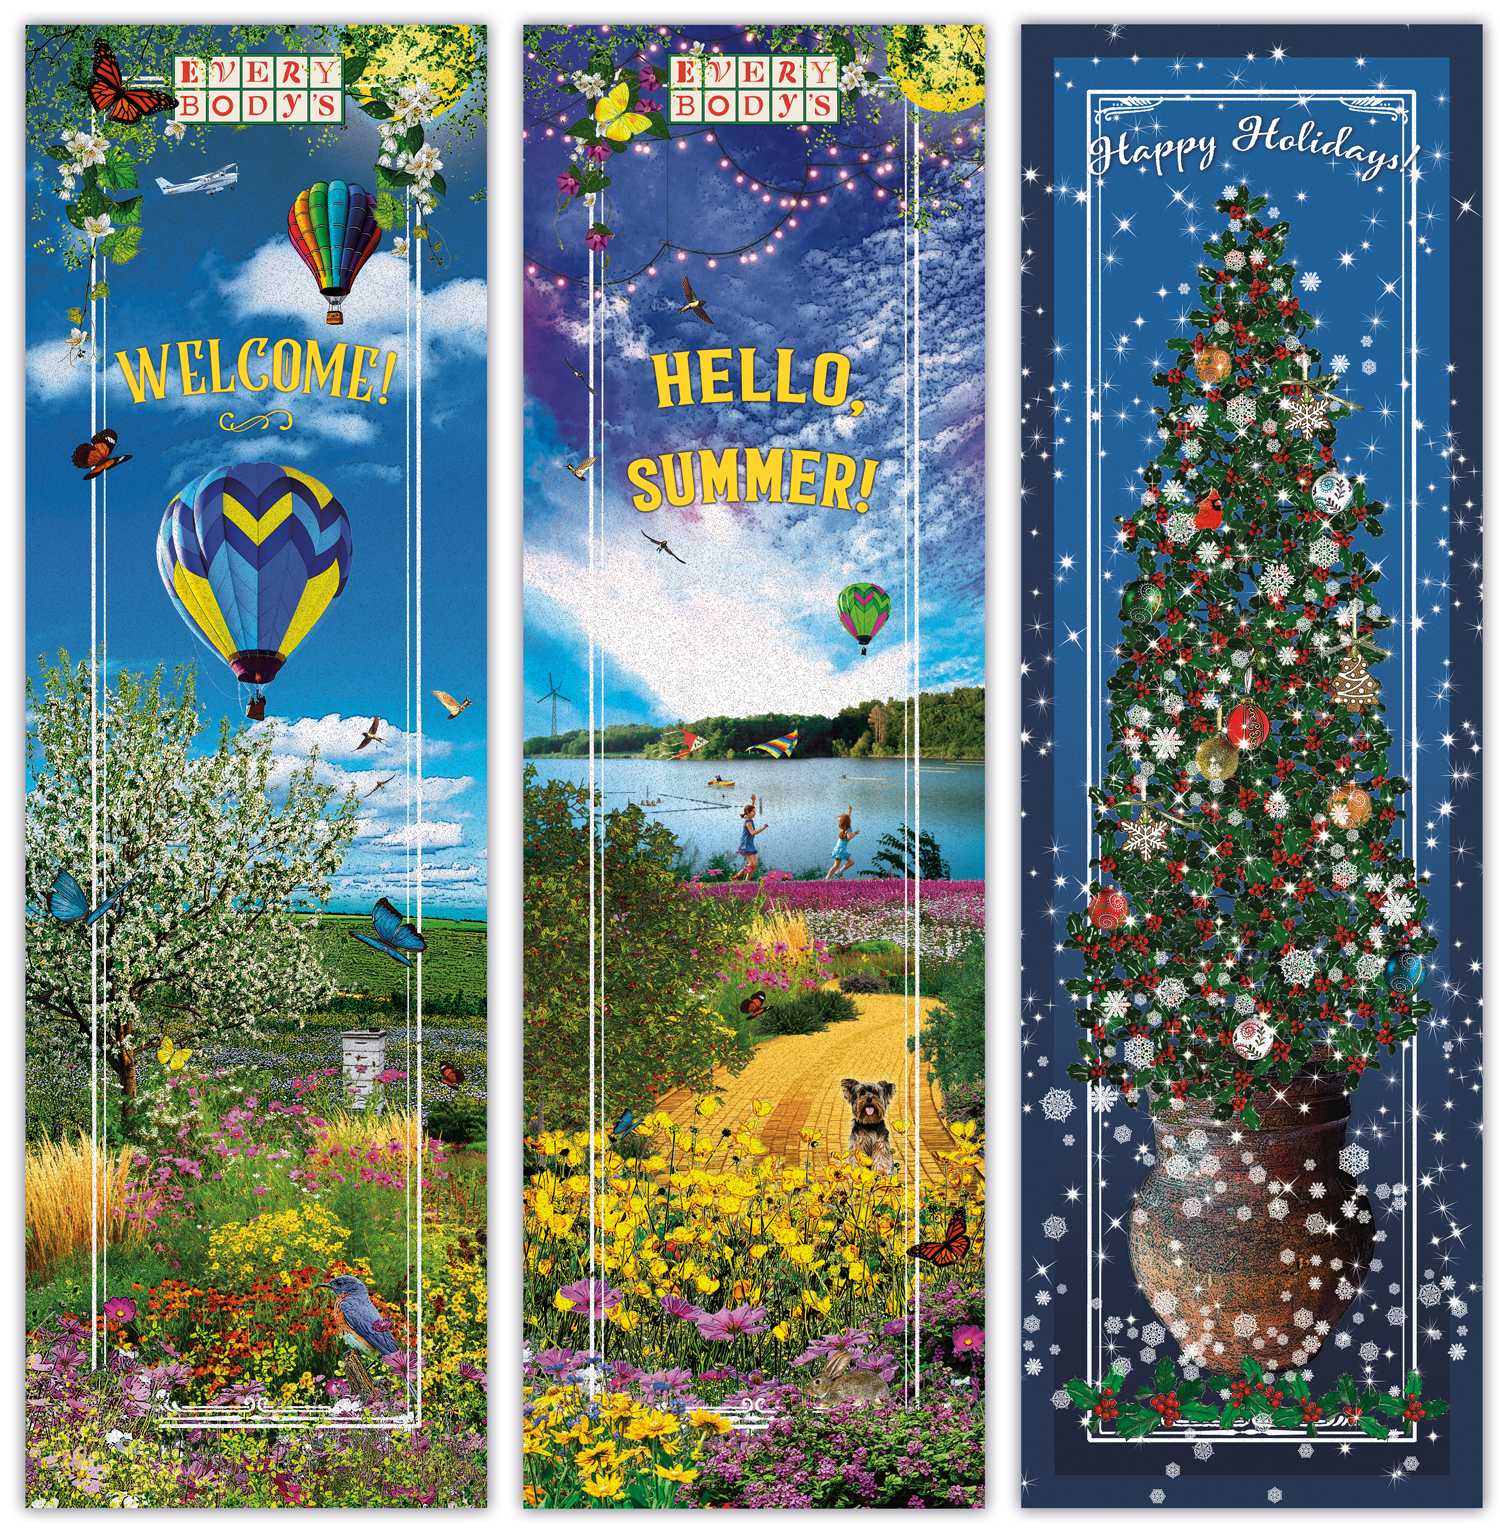 Holidays and Seasonal Banners for Everybody’s Whole Foods